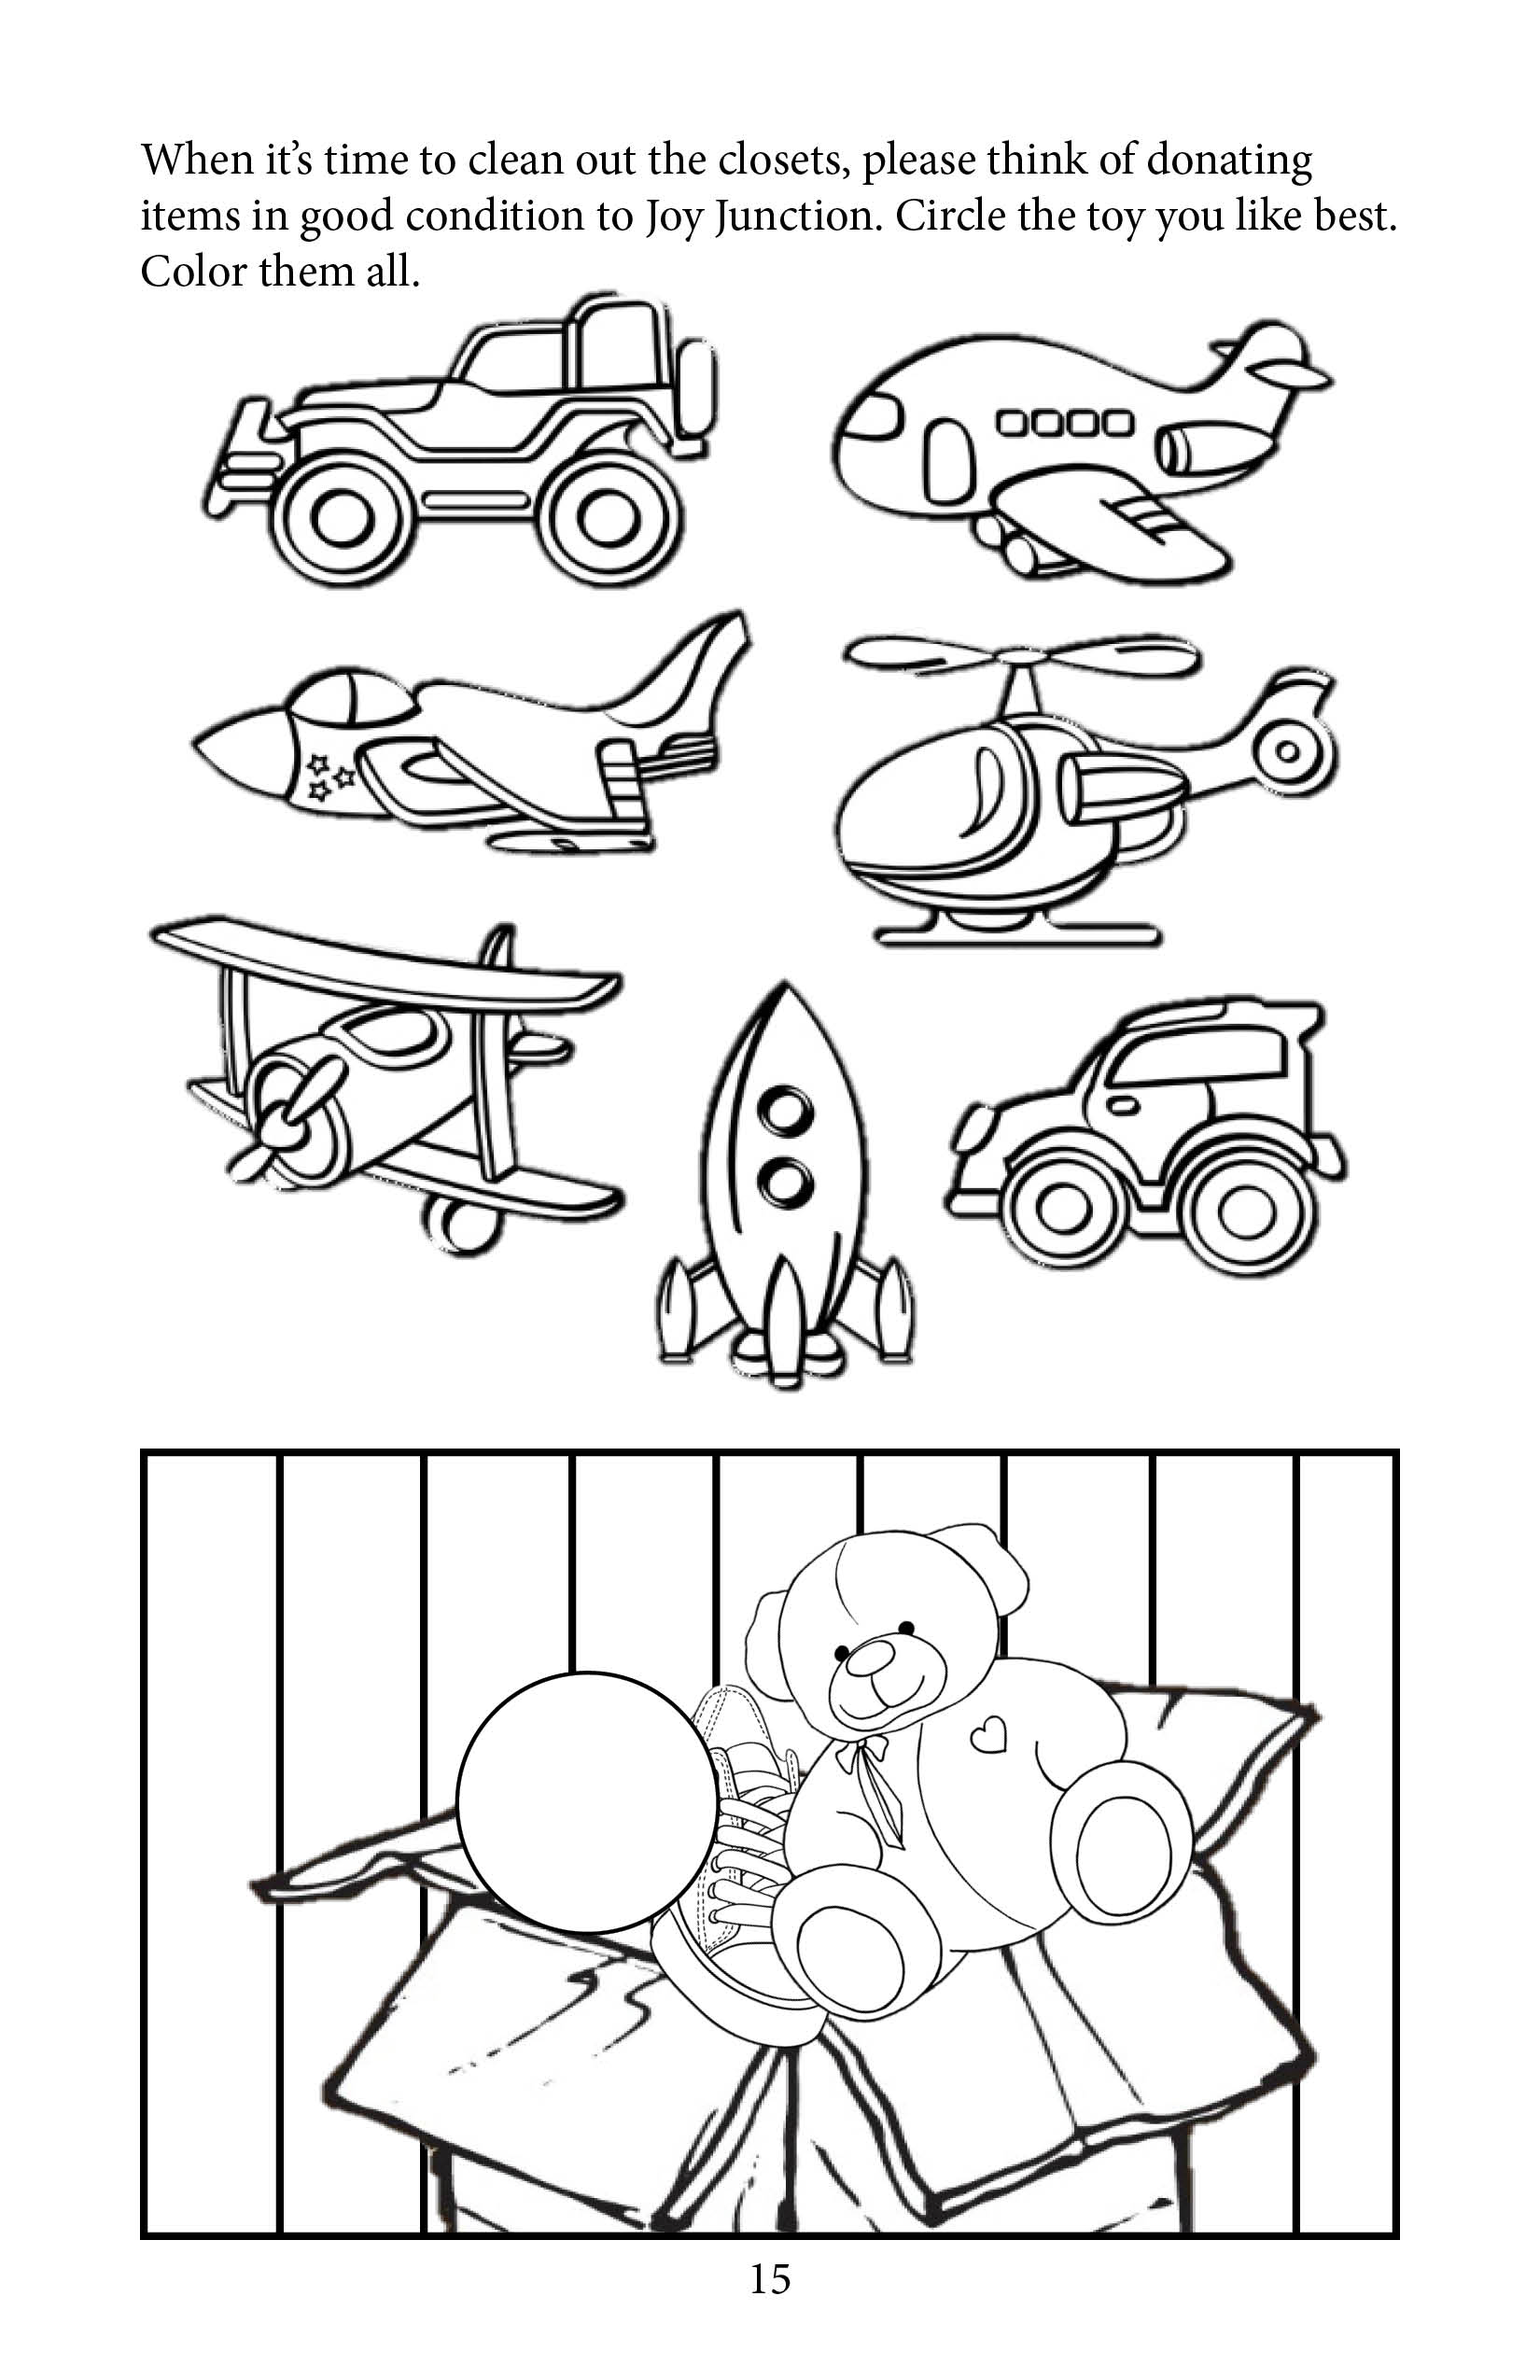 Joy Junction Coloring Book Page 15